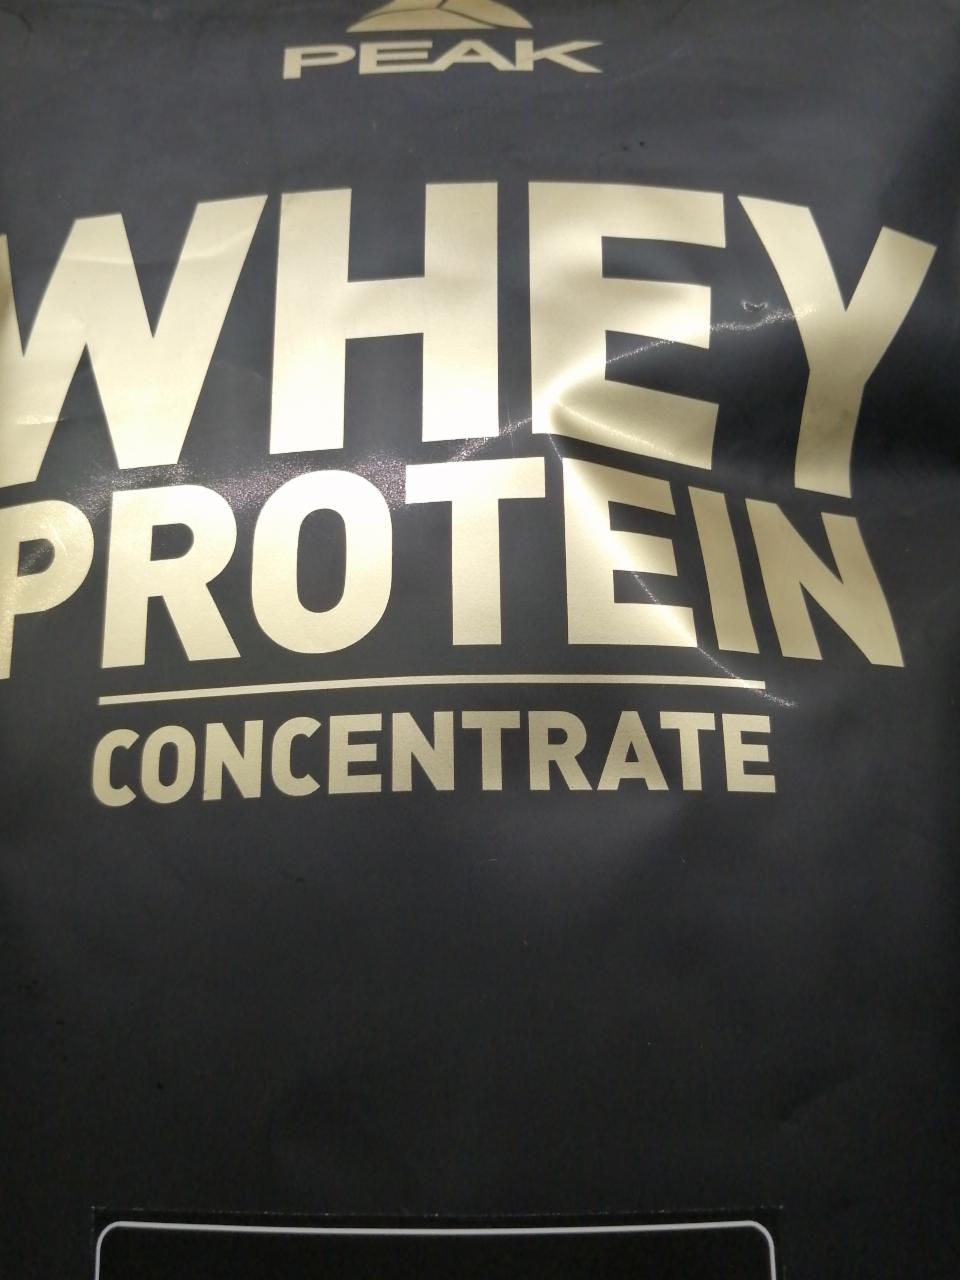 Fotografie - Whey protein concentrate